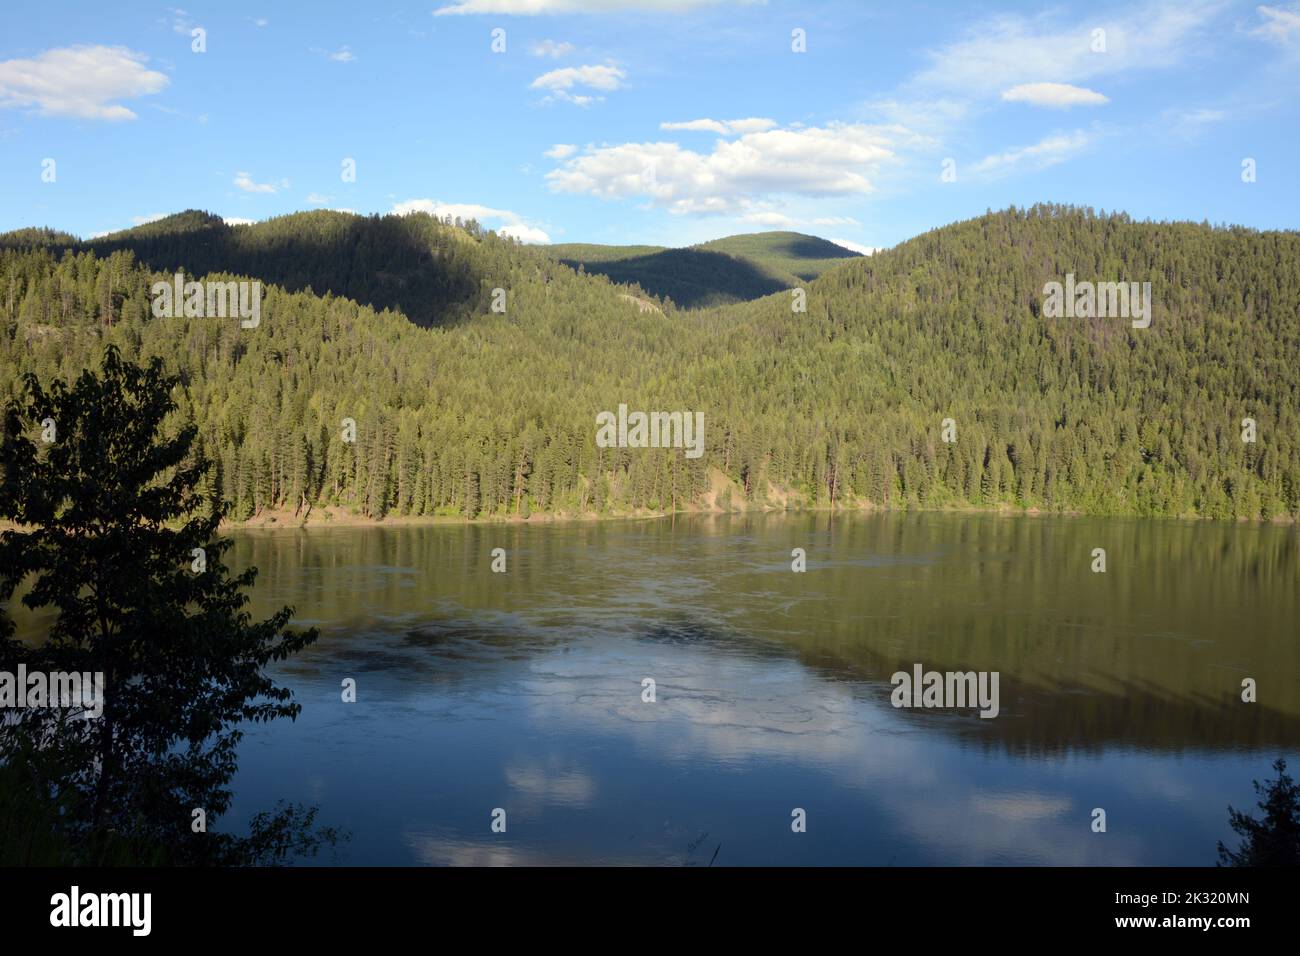 The Pend-Oreille River, a tributary of the Columbia, running through the Colville National Forest in northeastern Washington State, USA. Stock Photo